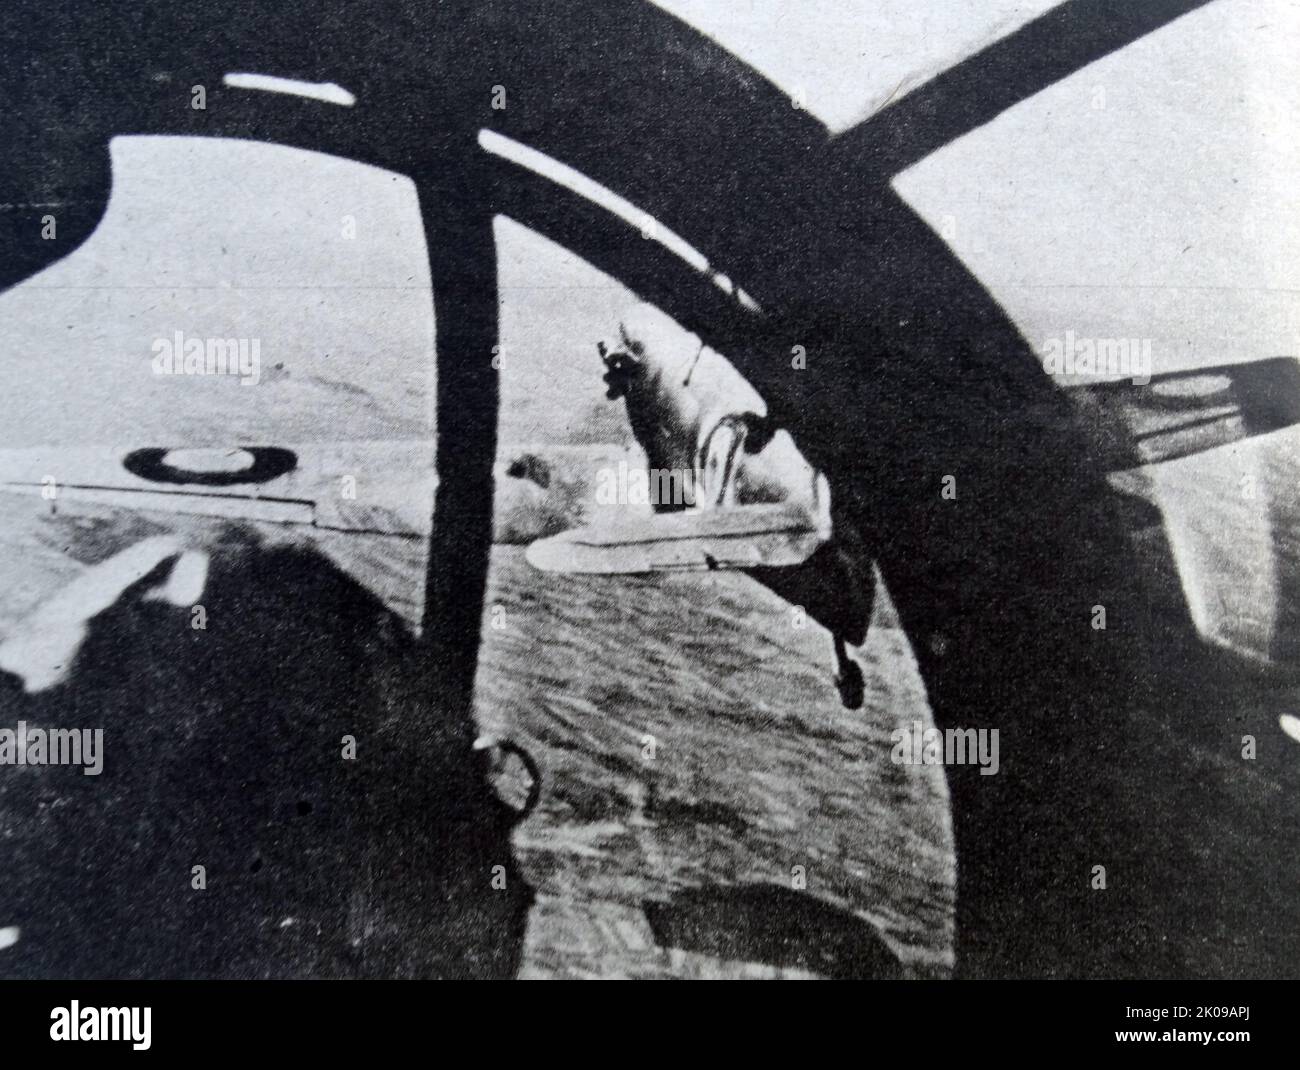 Rear gunner of a Nazi bomber firing on a British Spitfire during World War II, by Heinrich Hoffmann. Heinrich Hoffmann (12 September 1885 - 15 December 1957) was Adolf Hitler's official photographer, and a Nazi politician and publisher, who was a member of Hitler's intimate circle. Stock Photo